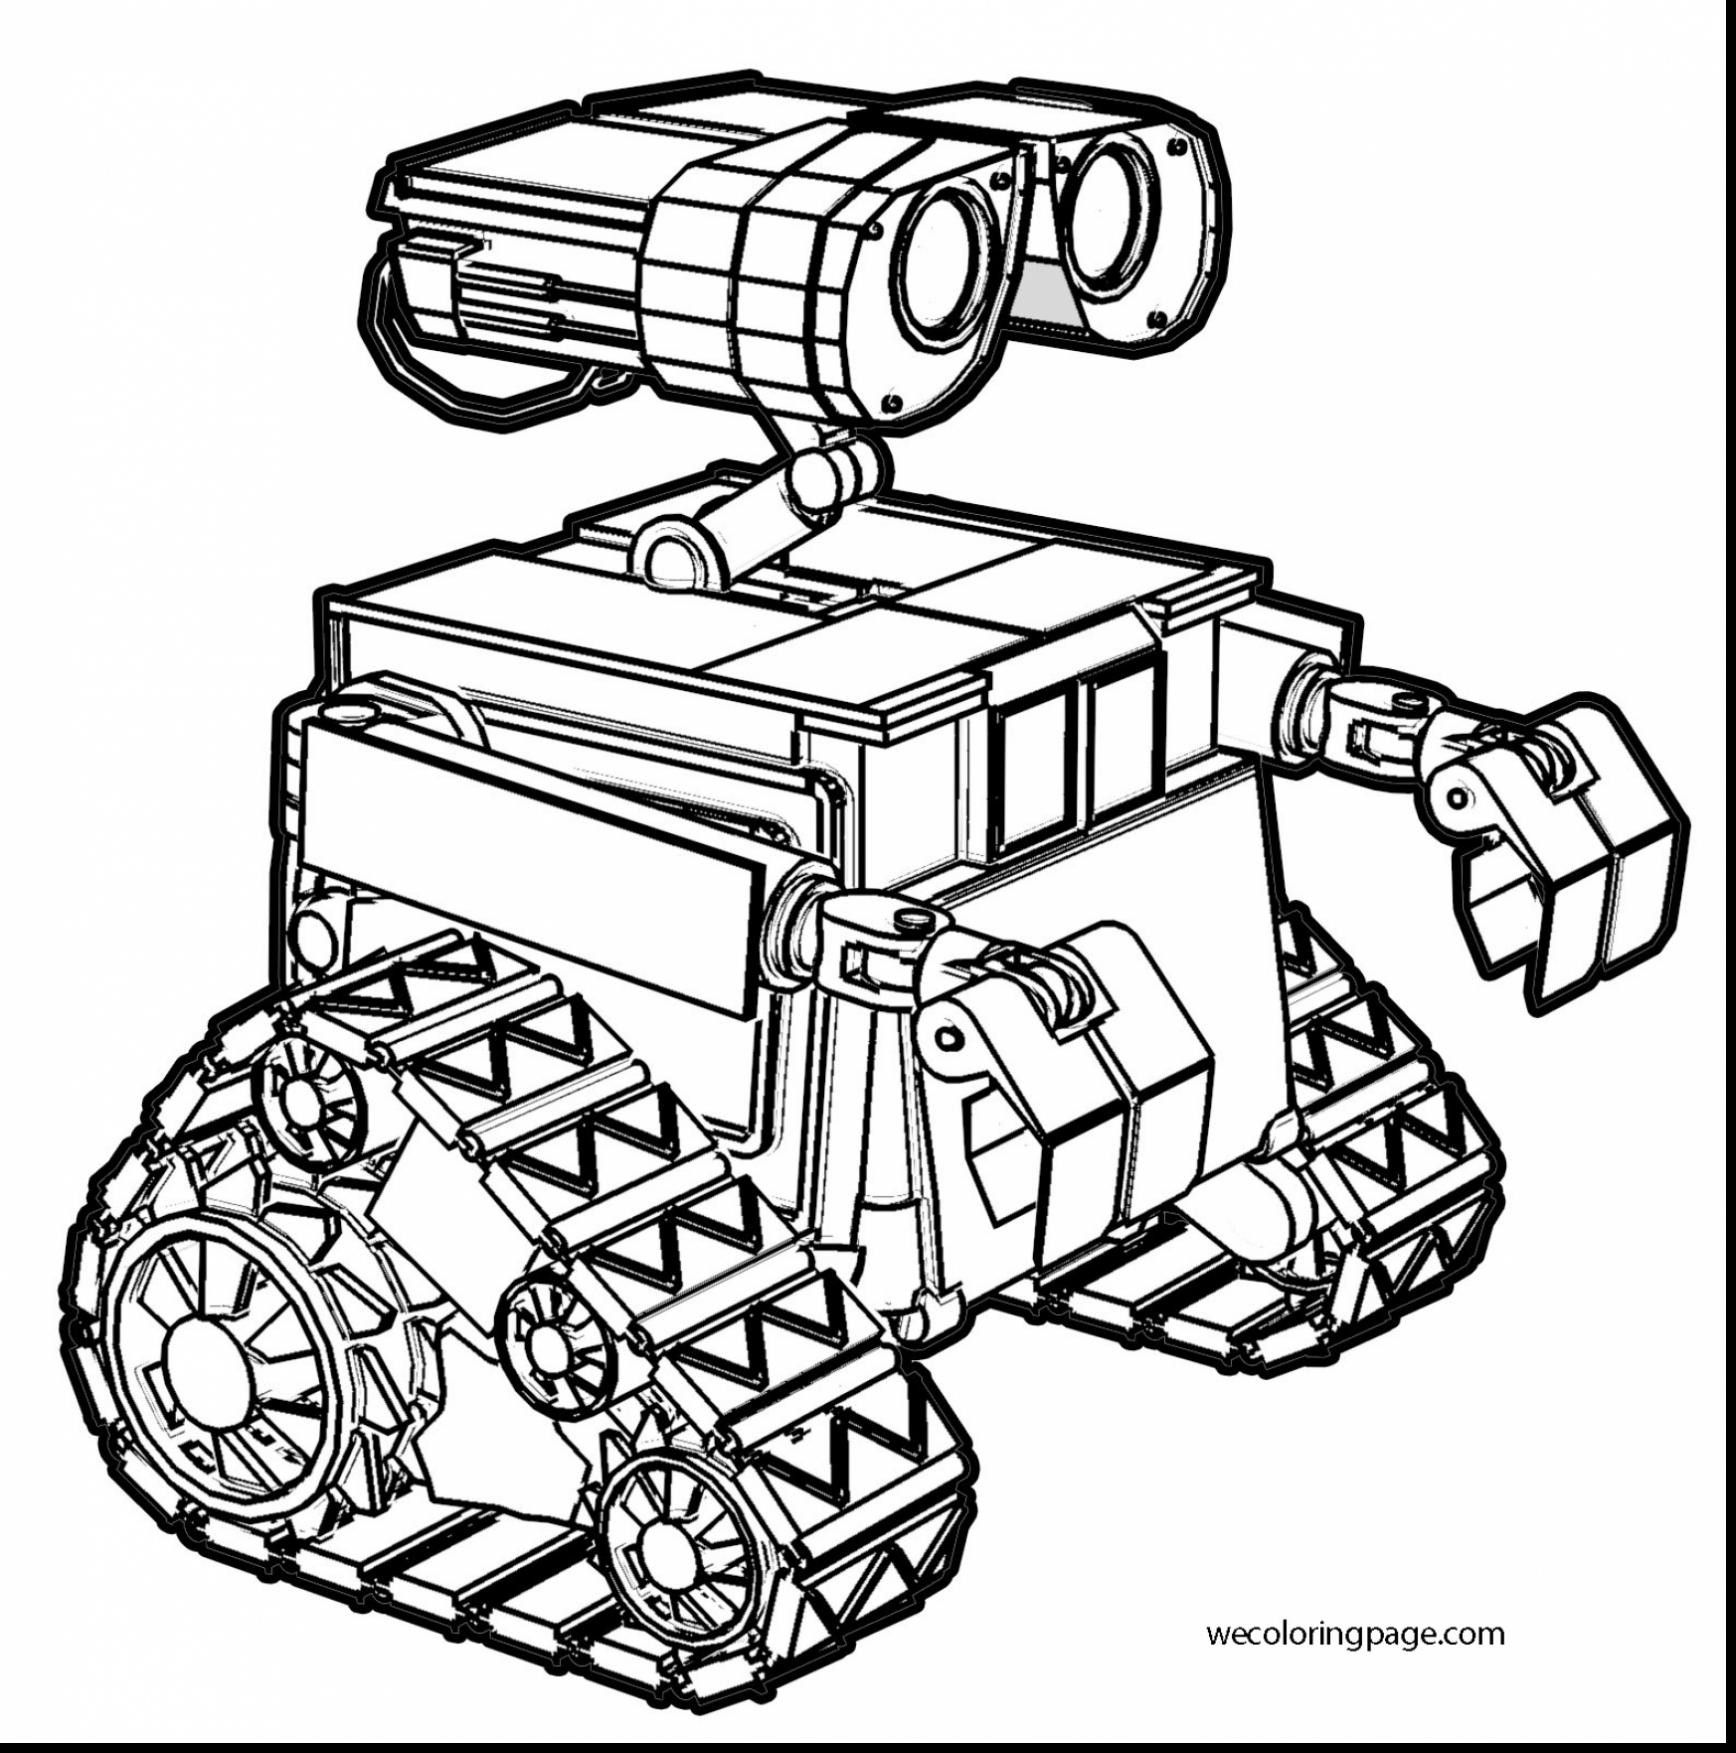 Robot Coloring Pages at Free printable colorings